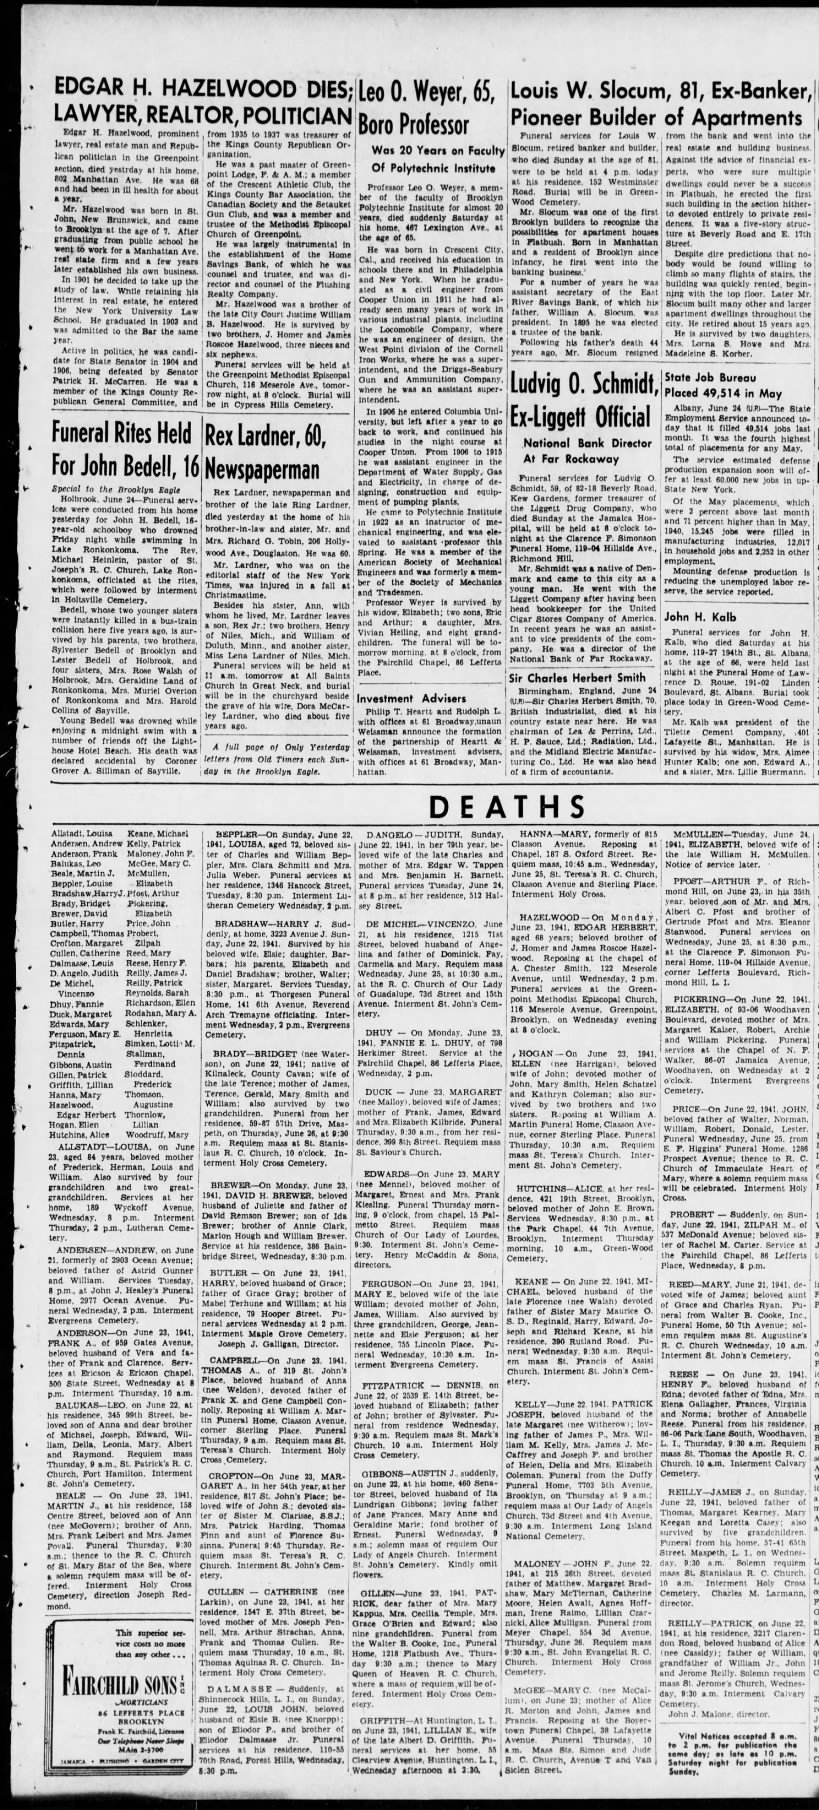 Personal Details Fannie E.L. Dhuy Obituary, The Brooklyn Daily Eagle 24 June 1941, Tue, page 11